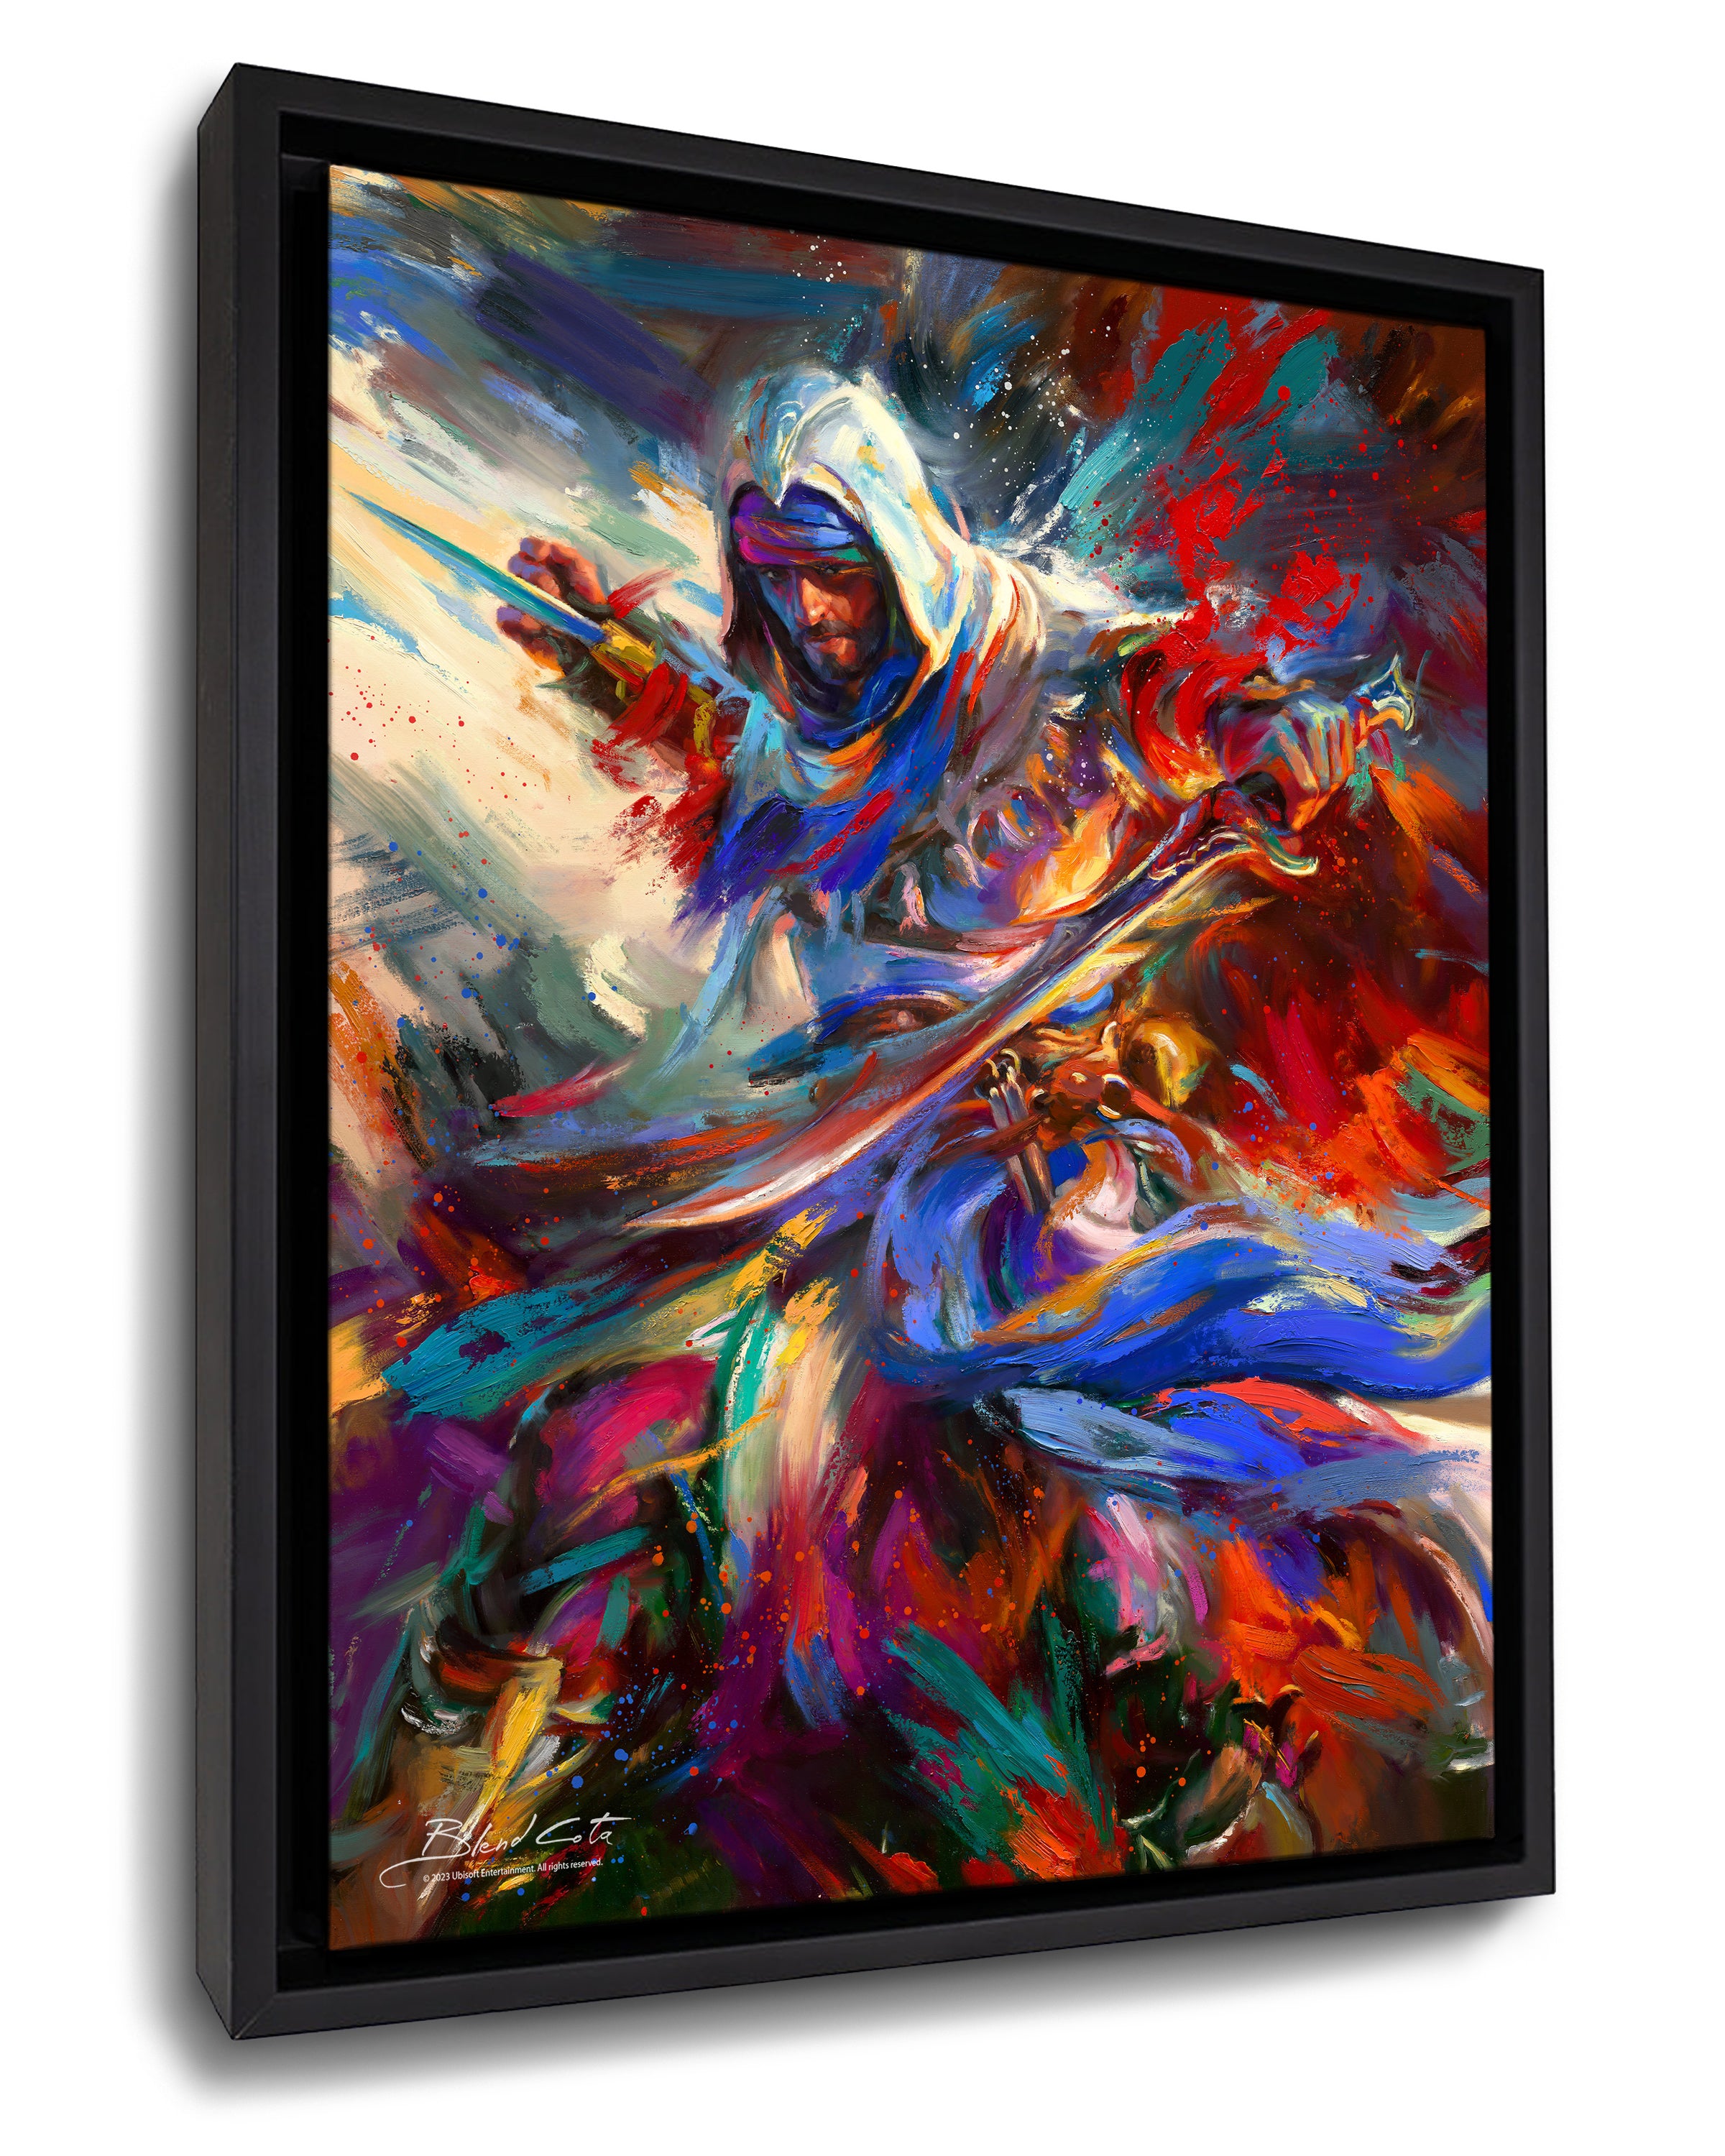 
                  
                    Framed art print on canvas of Assassin's Creed Basim of Mirage bursting forth with energy and painted with colorful brushstrokes in an expressionistic style.
                  
                